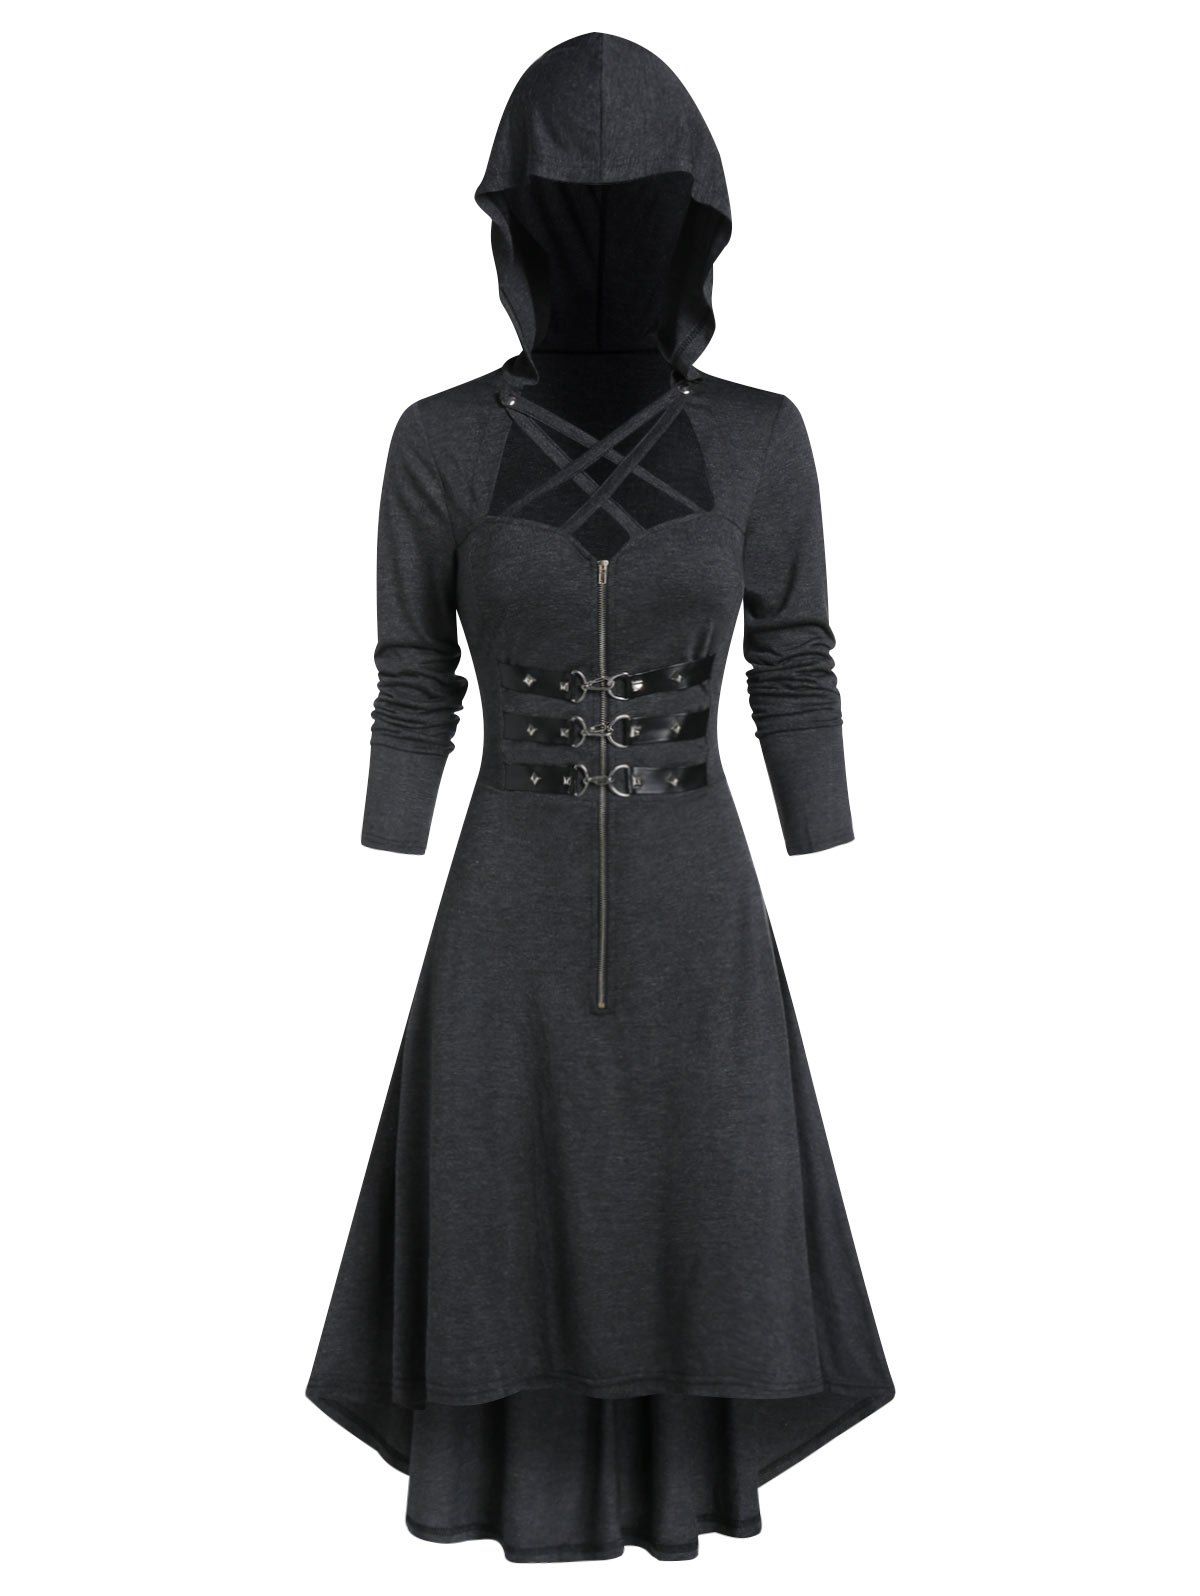 Hooded Lobster Buckle Strap High Low Gothic Dress - DARK GRAY L